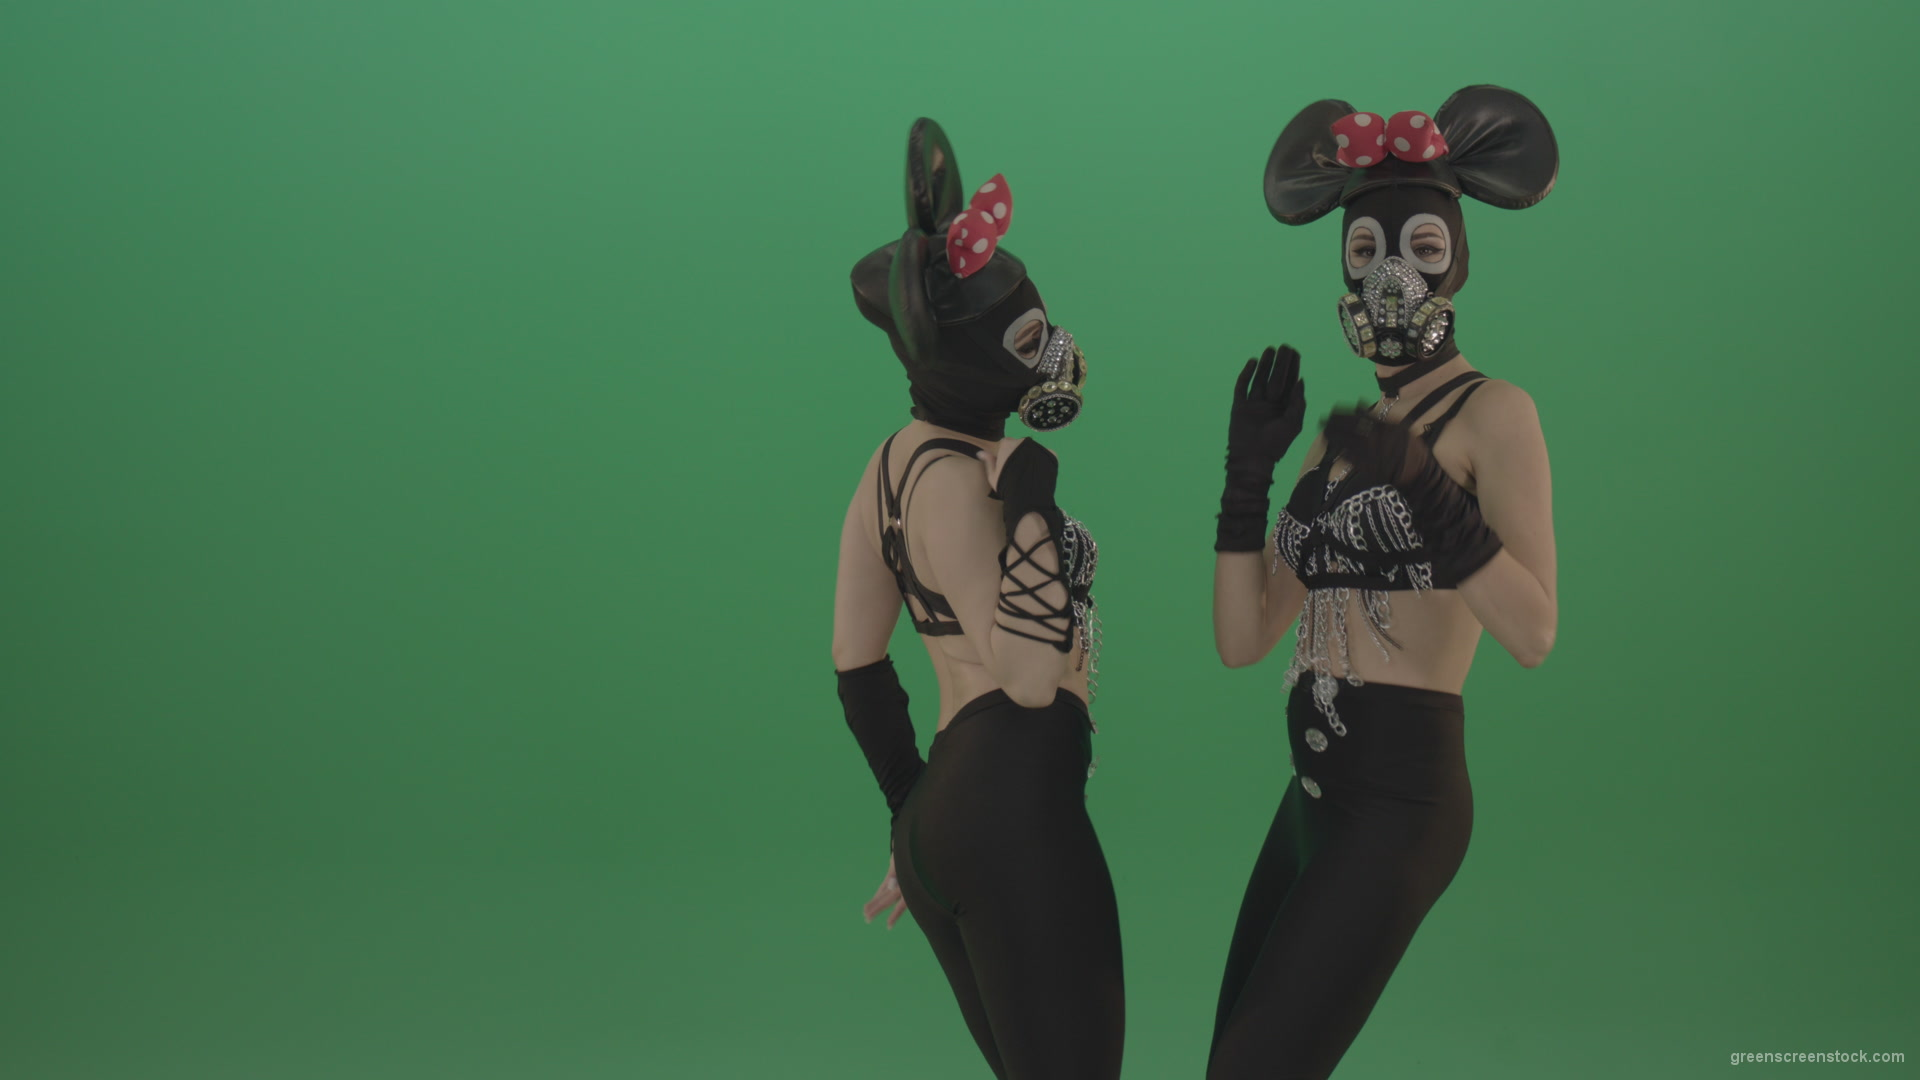 Girls-dressed-Mickey-Mouse-dance-well-on-green-screen_008 Green Screen Stock